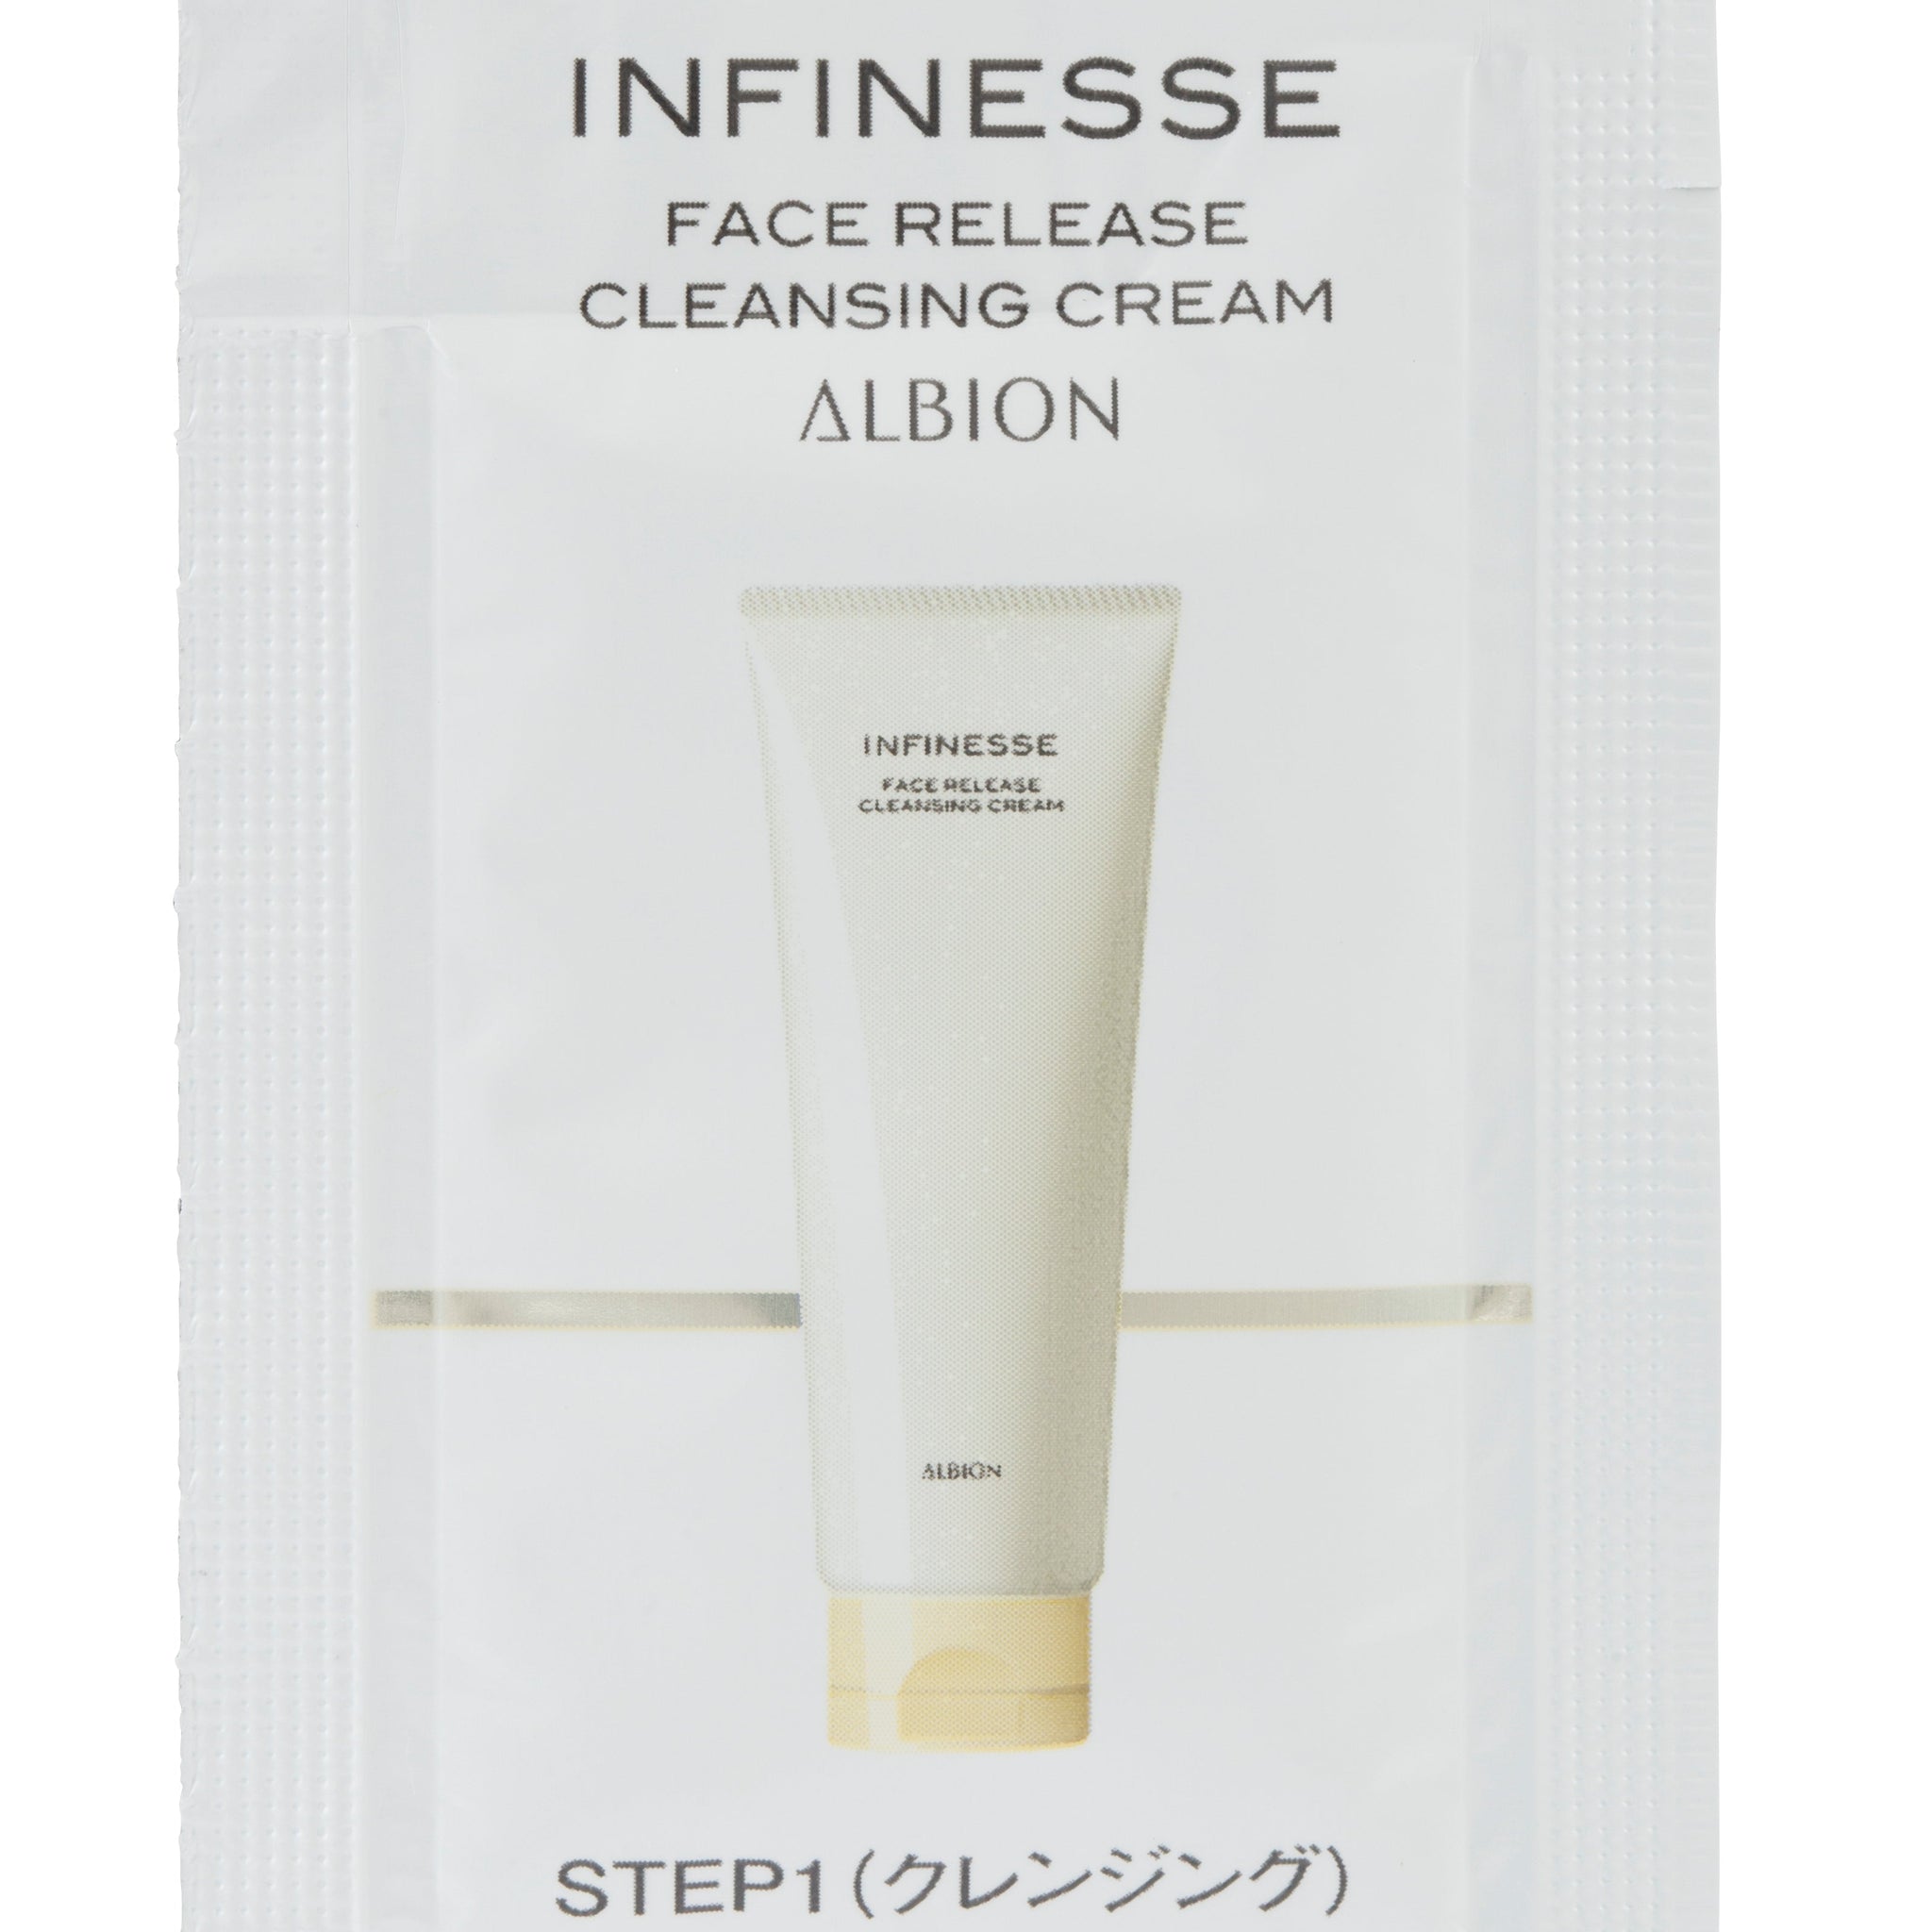 INFINESSE FACE RELEASE CLEANSING CREAM 3.0 g 1 Sachet